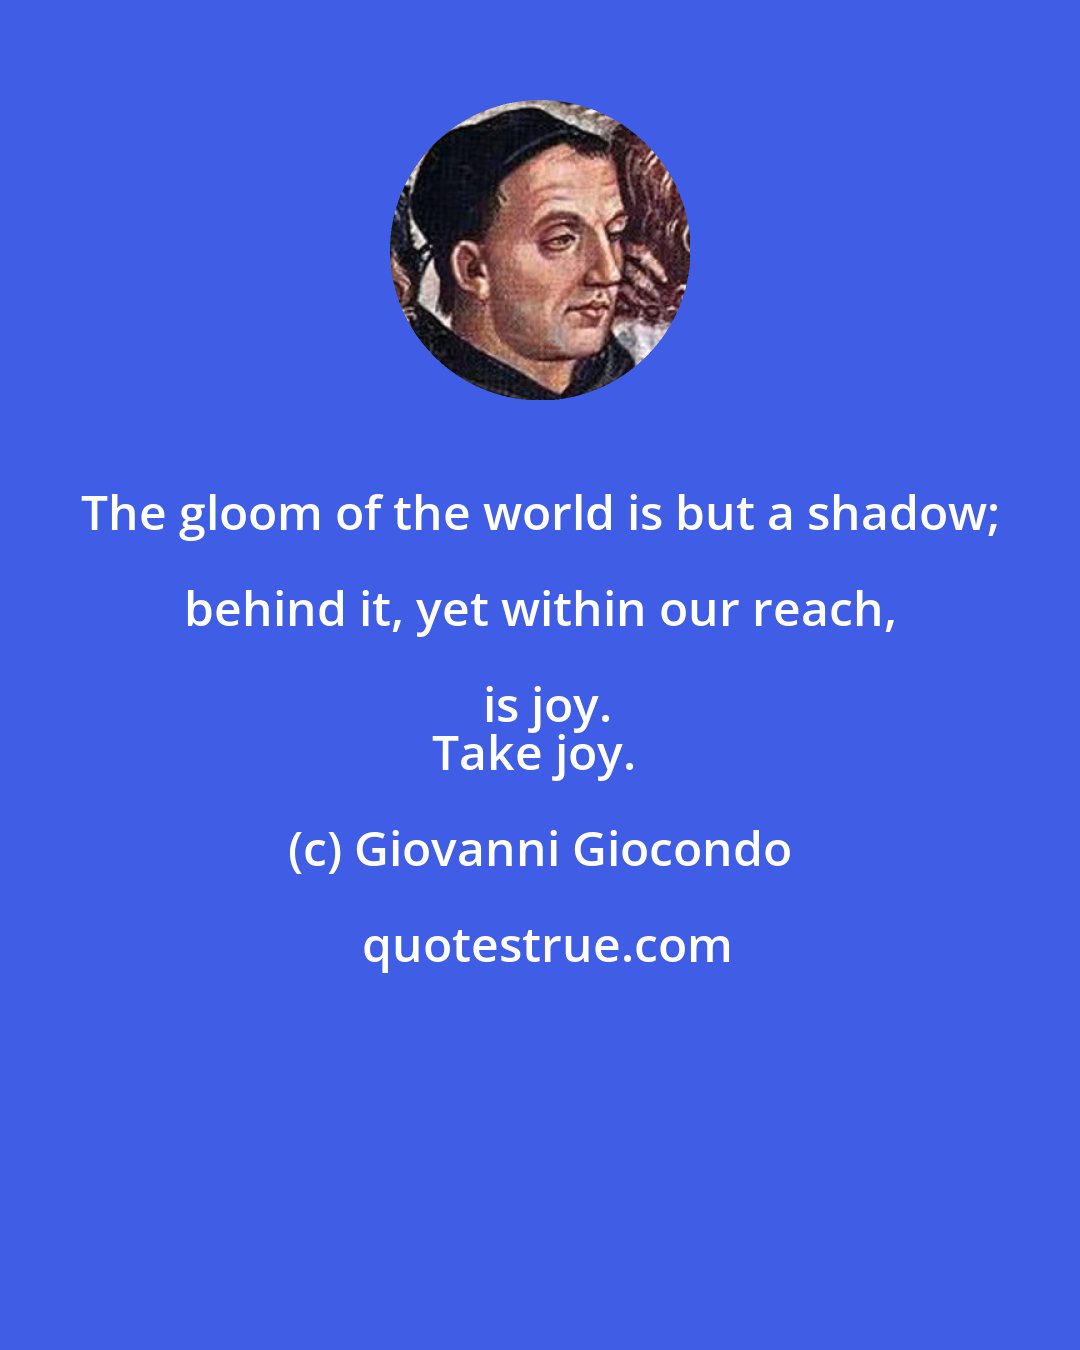 Giovanni Giocondo: The gloom of the world is but a shadow; behind it, yet within our reach, is joy.
Take joy.